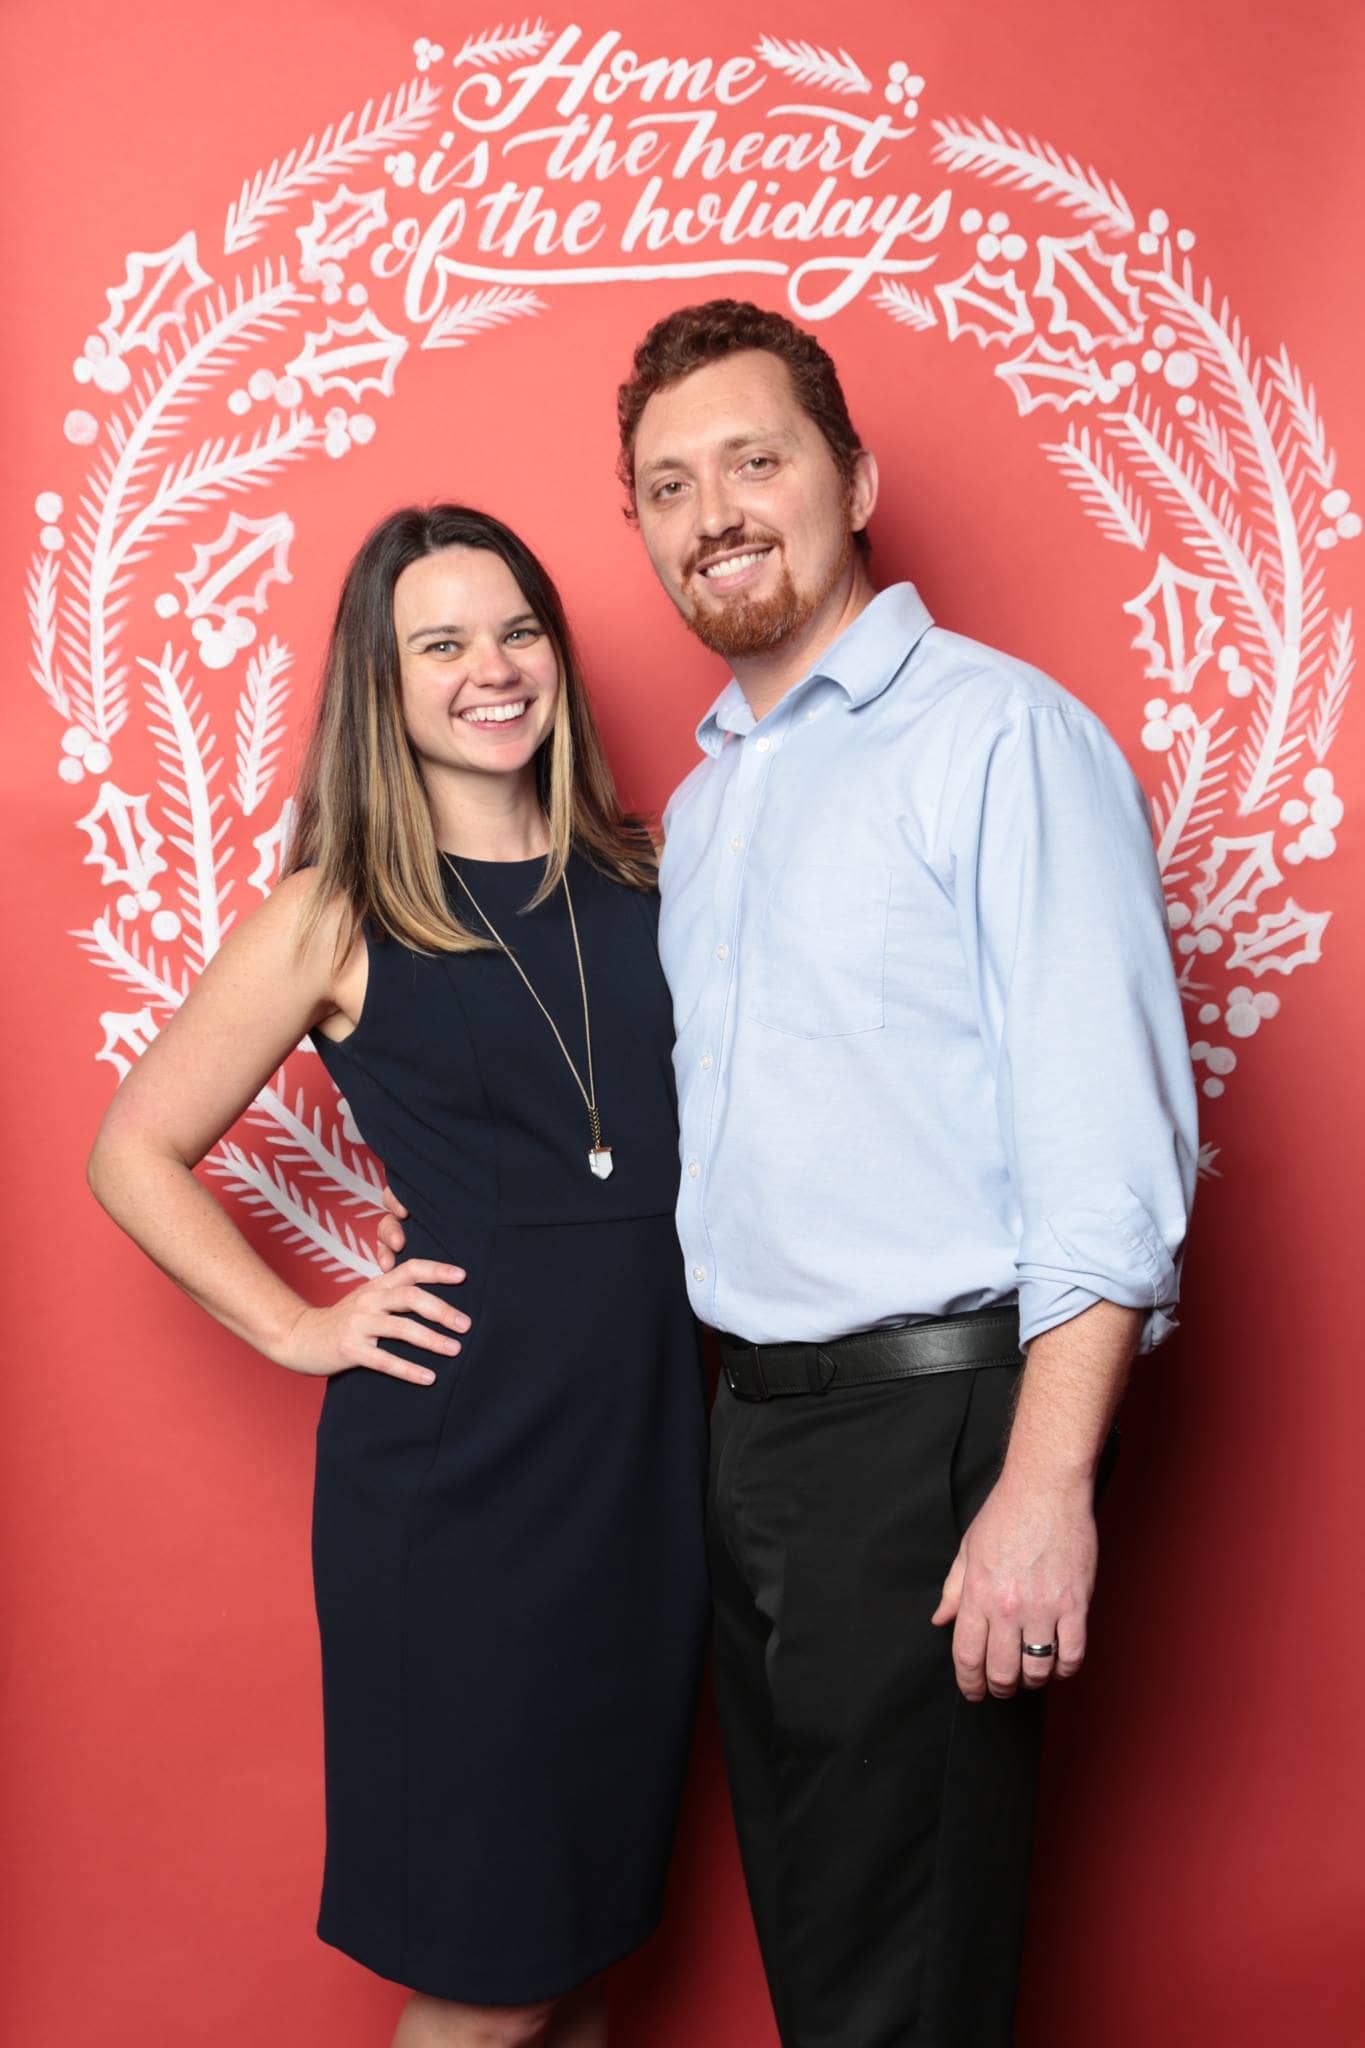 Hand lettered holiday photo booth backdrop by Hillery Powers